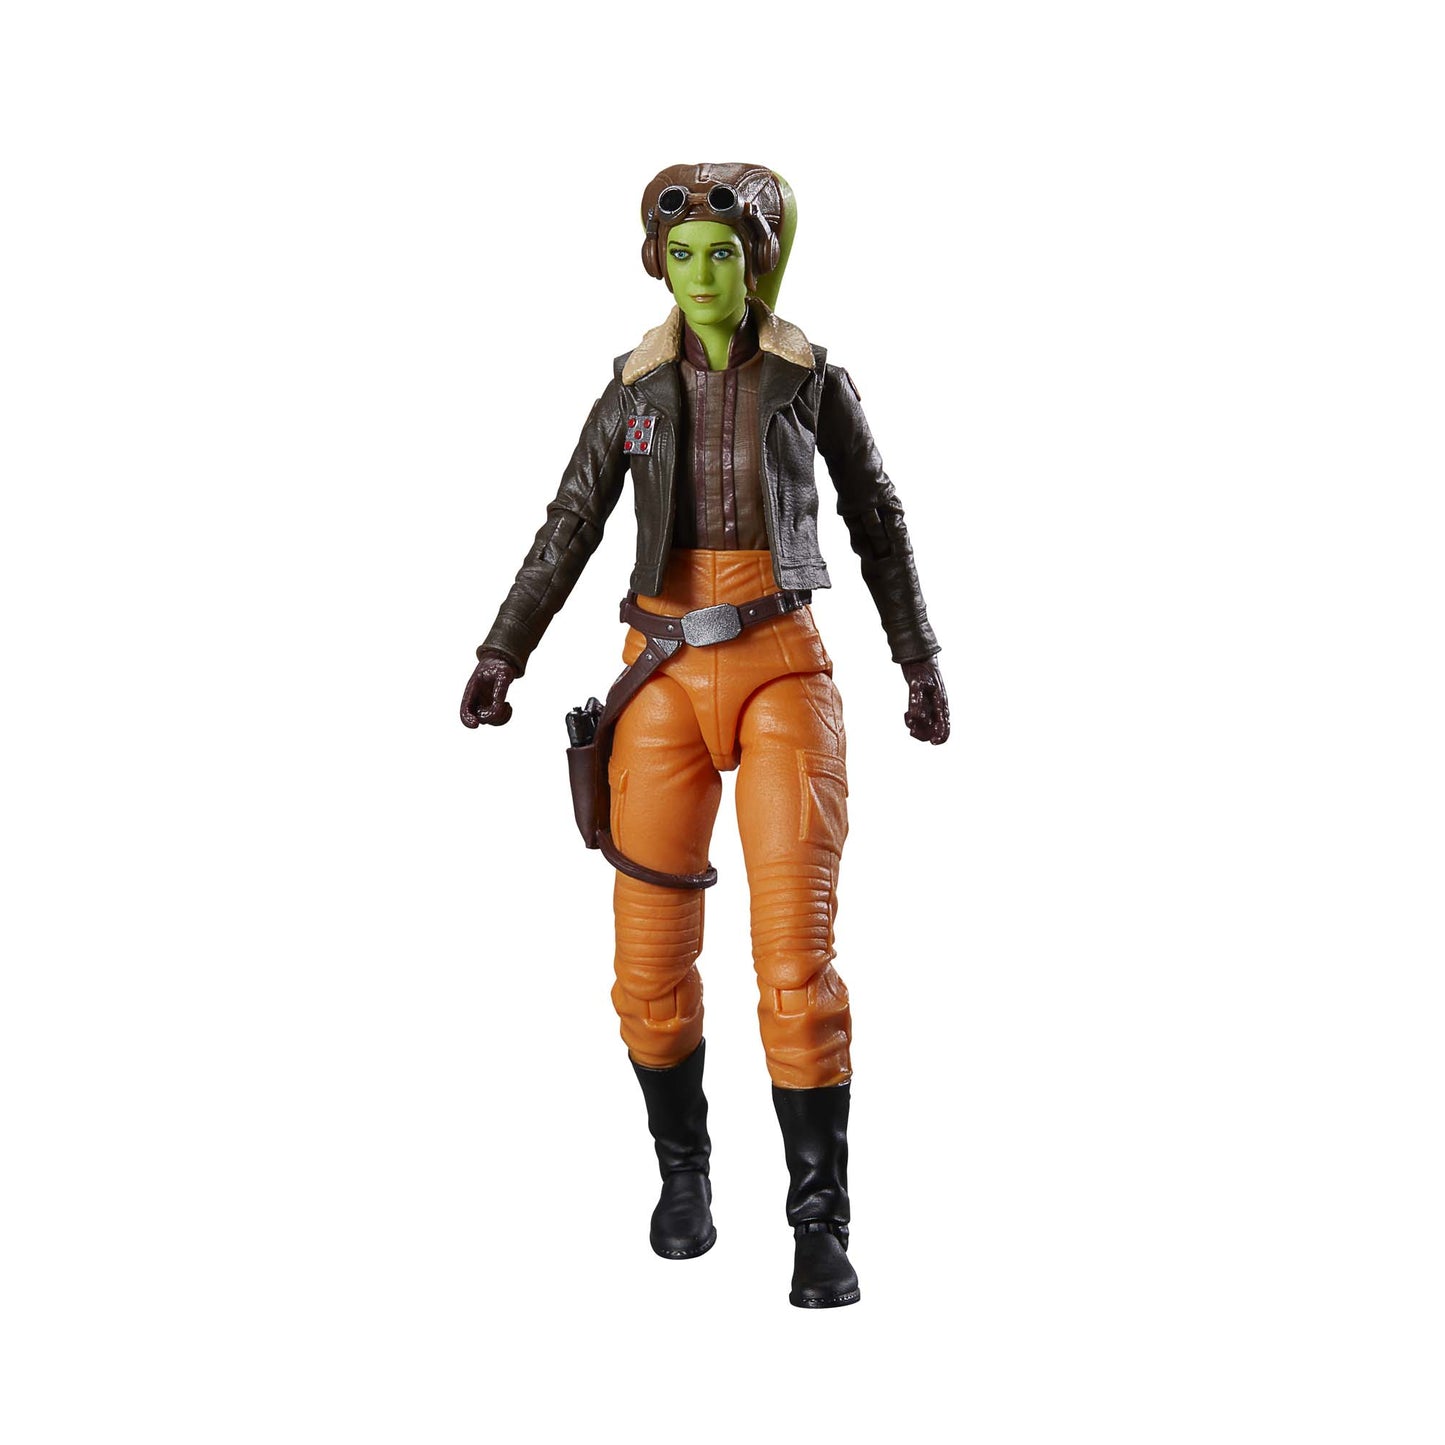 Star Wars The Black Series General Hera Syndulla Action Figure Toy standing - Heretoserveyou